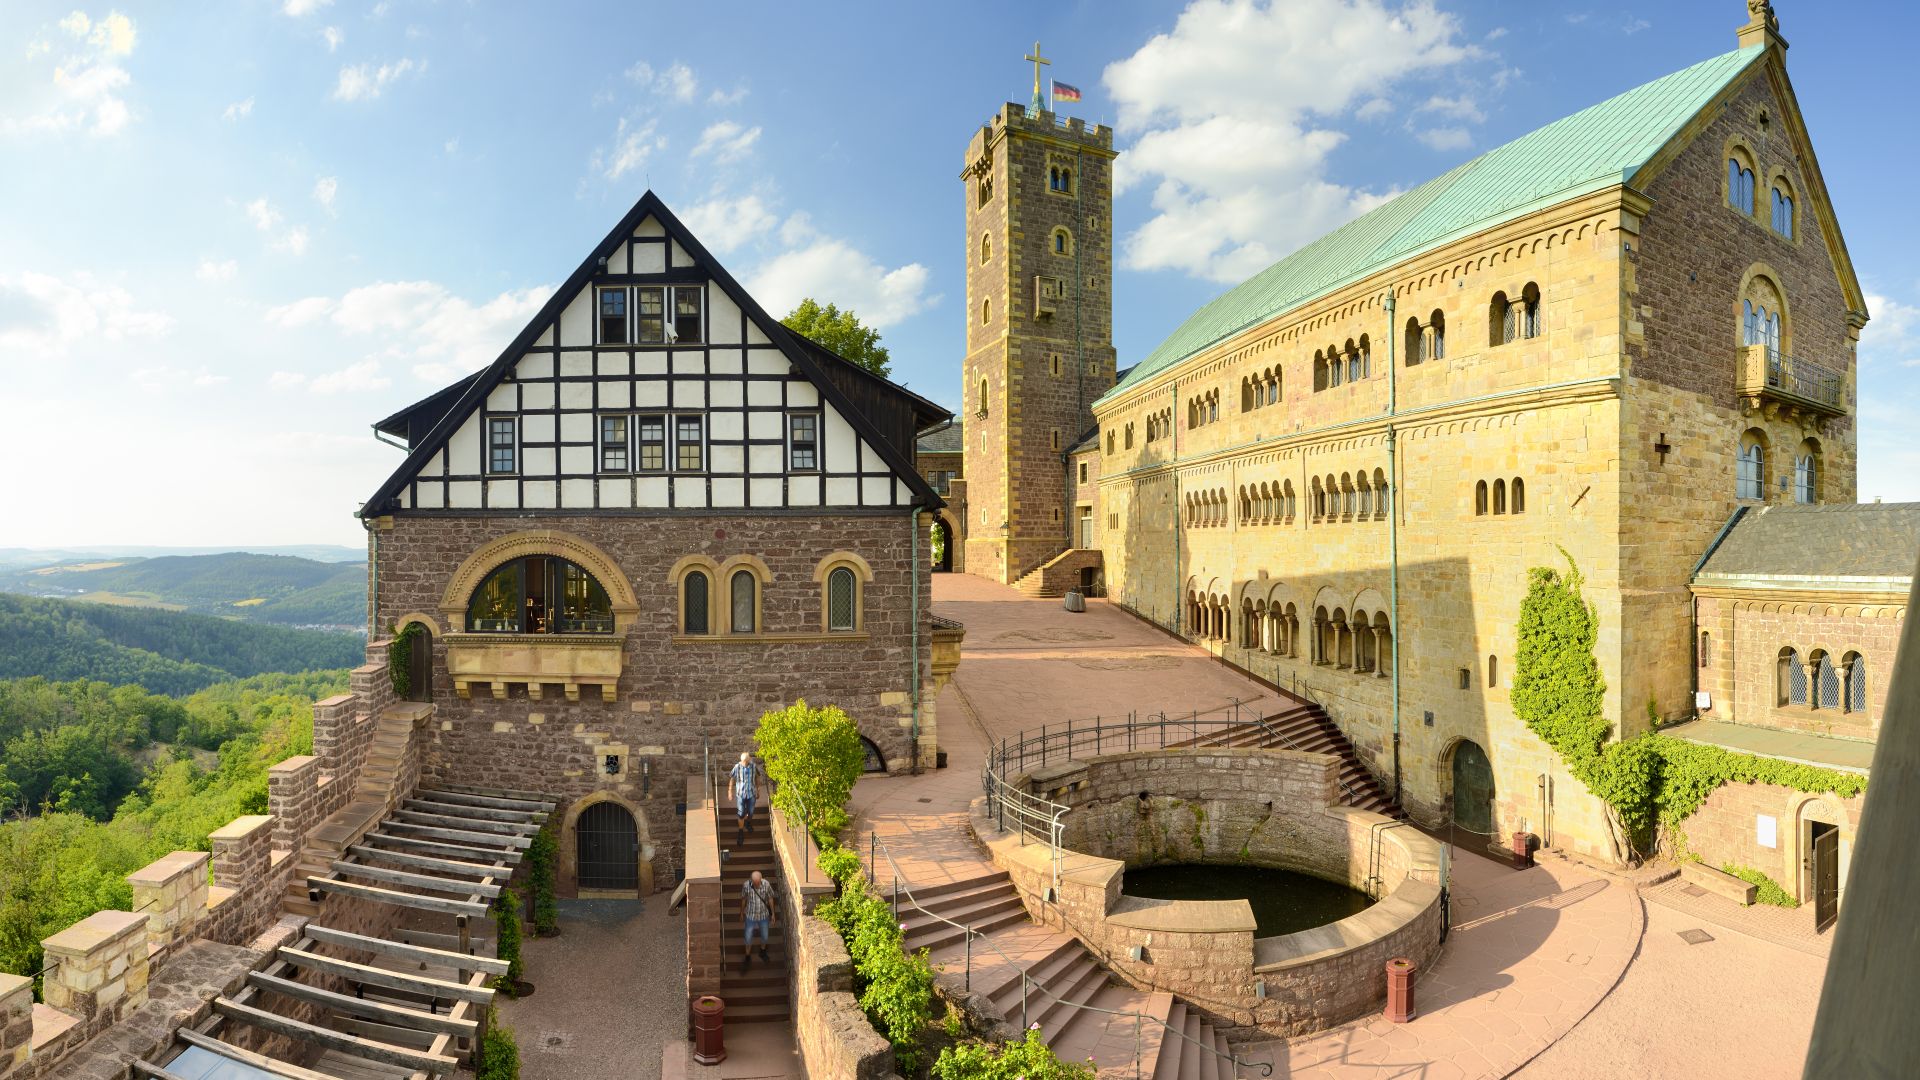 Eisenach: View of the inner courtyard of the Wartburg